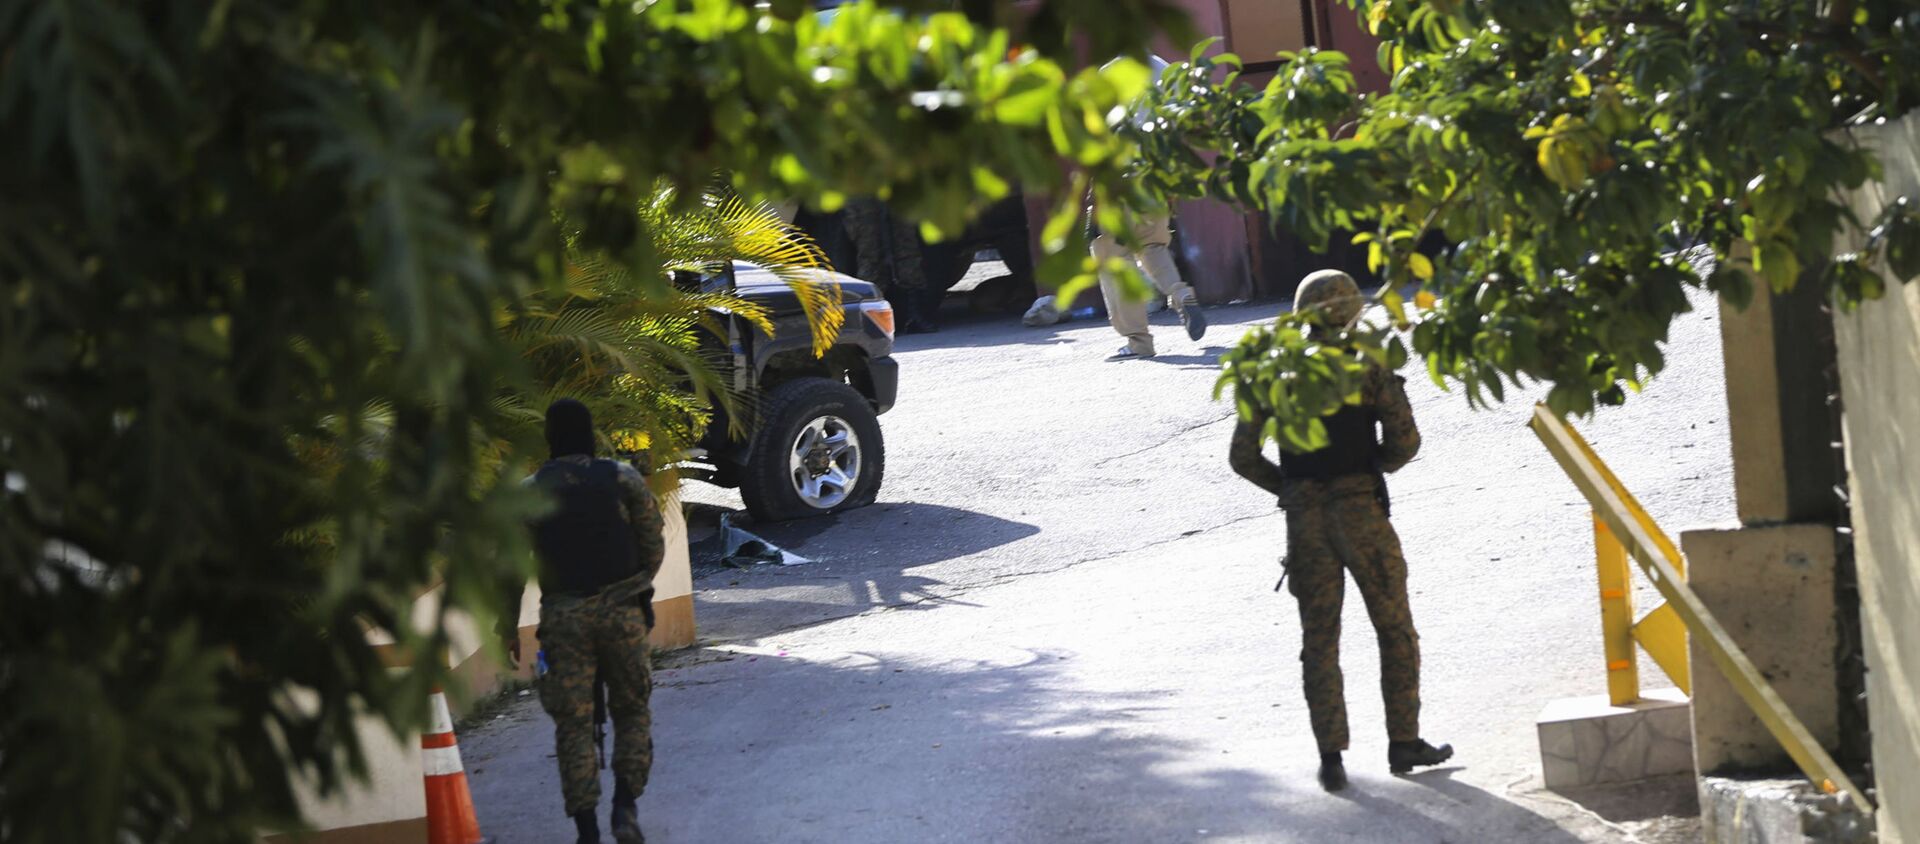 Soldiers stand guard at the entrance to the house of late Haitian President Jovenel Moise in Port-au-Prince, Haiti, Wednesday, July 7, 2021. Moïse was assassinated in an attack on his private residence early Wednesday, and first lady Martine Moïse was shot in the overnight attack and hospitalized, according to a statement from the country’s interim prime minister. (AP Photo/Joseph Odelyn) - 俄罗斯卫星通讯社, 1920, 14.07.2021